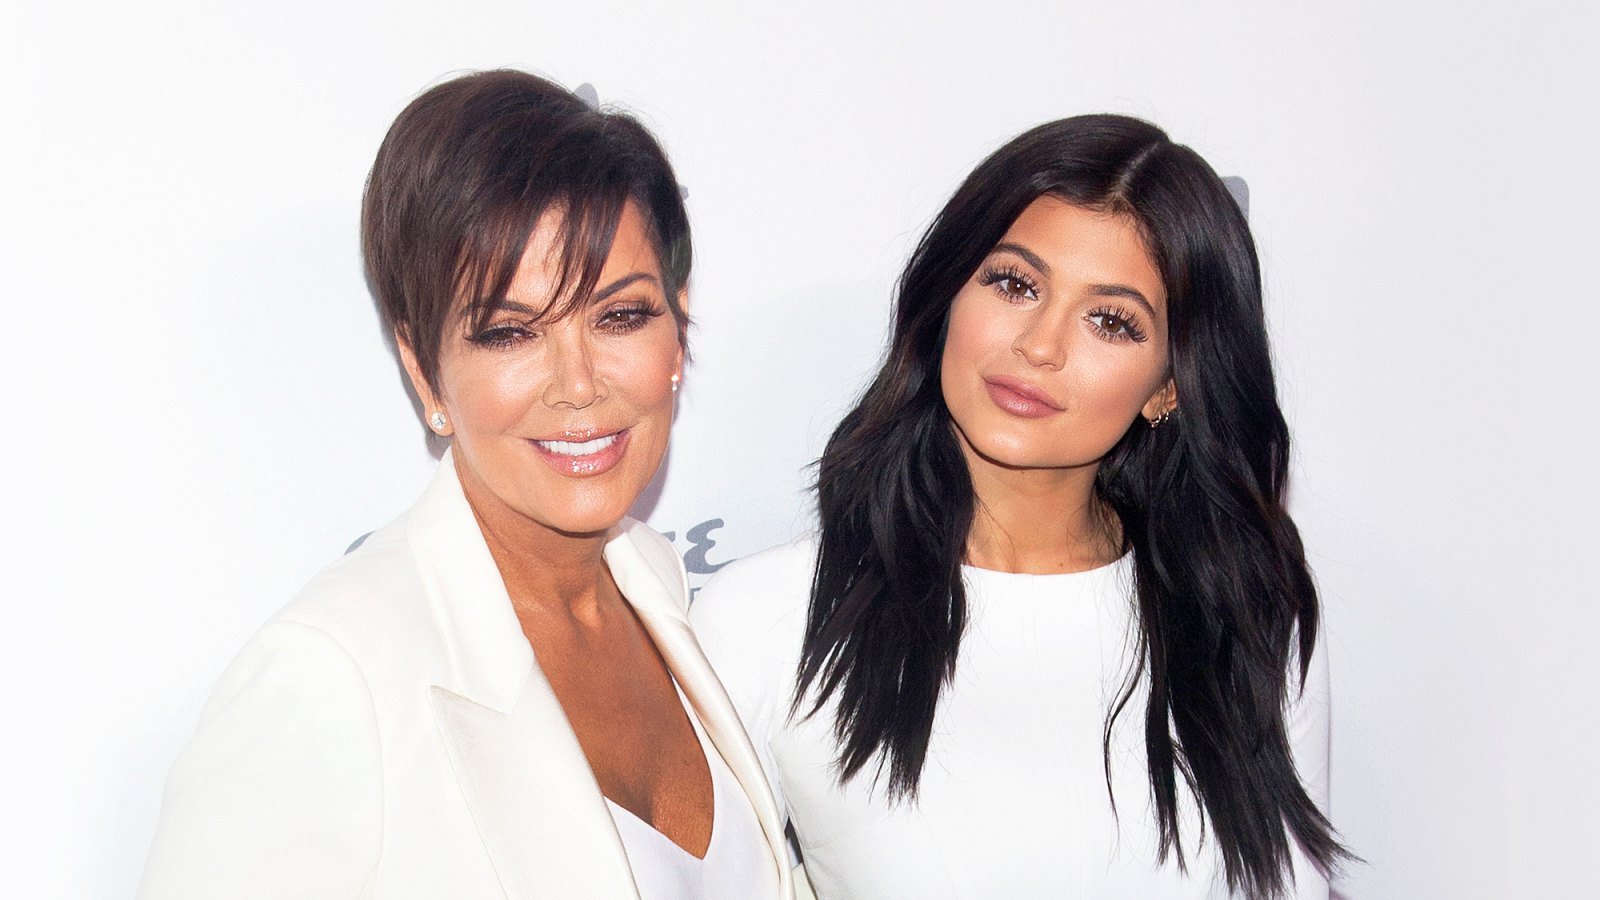 Kris Jenner and Kylie Jenner attend the 2015 NBCUniversal Cable Entertainment Upfront at the Jacob K. Javits Convention Center in New York City.